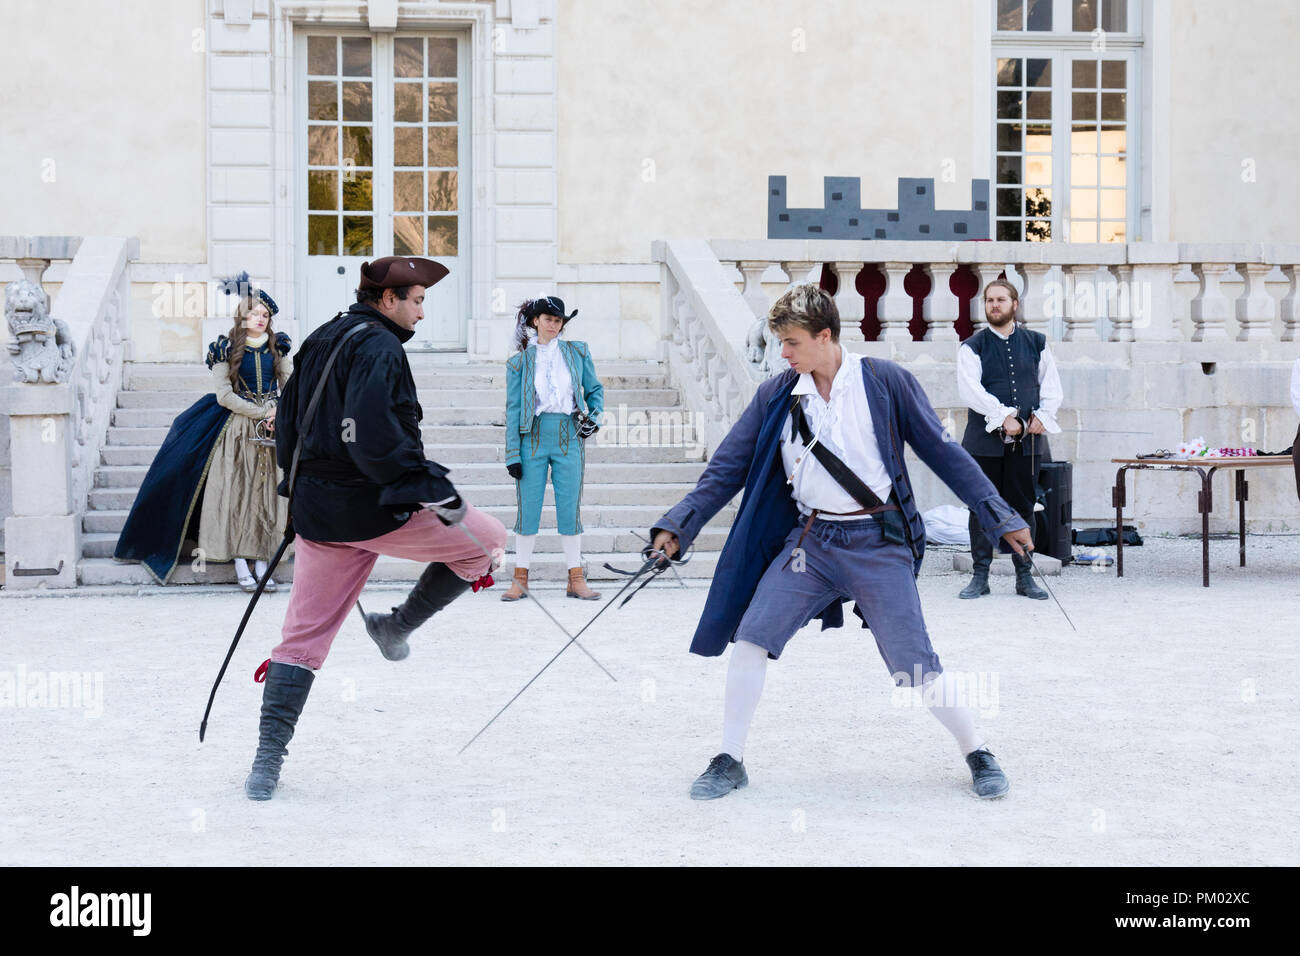 Sassenage castle, Isere, France - September 15 2018 : European Heritage Day, Lames du Dauphine fencing club reenacting fights. Stock Photo